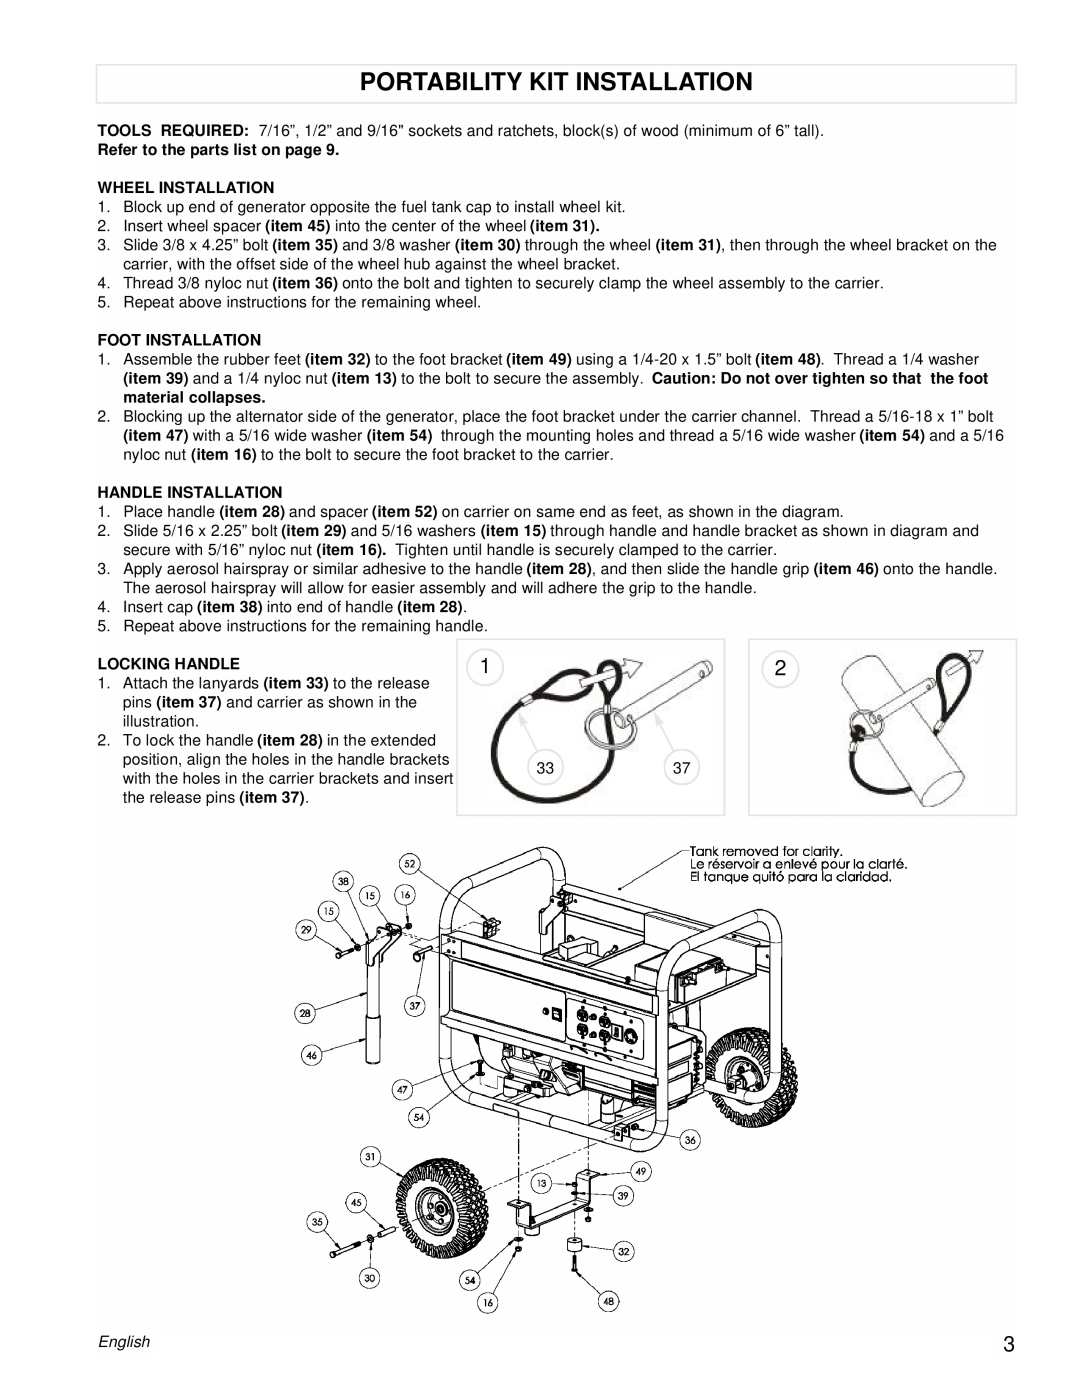 Powermate PMC496751 Portability Kit Installation, Refer to the parts list on page, Wheel Installation, Foot Installation 